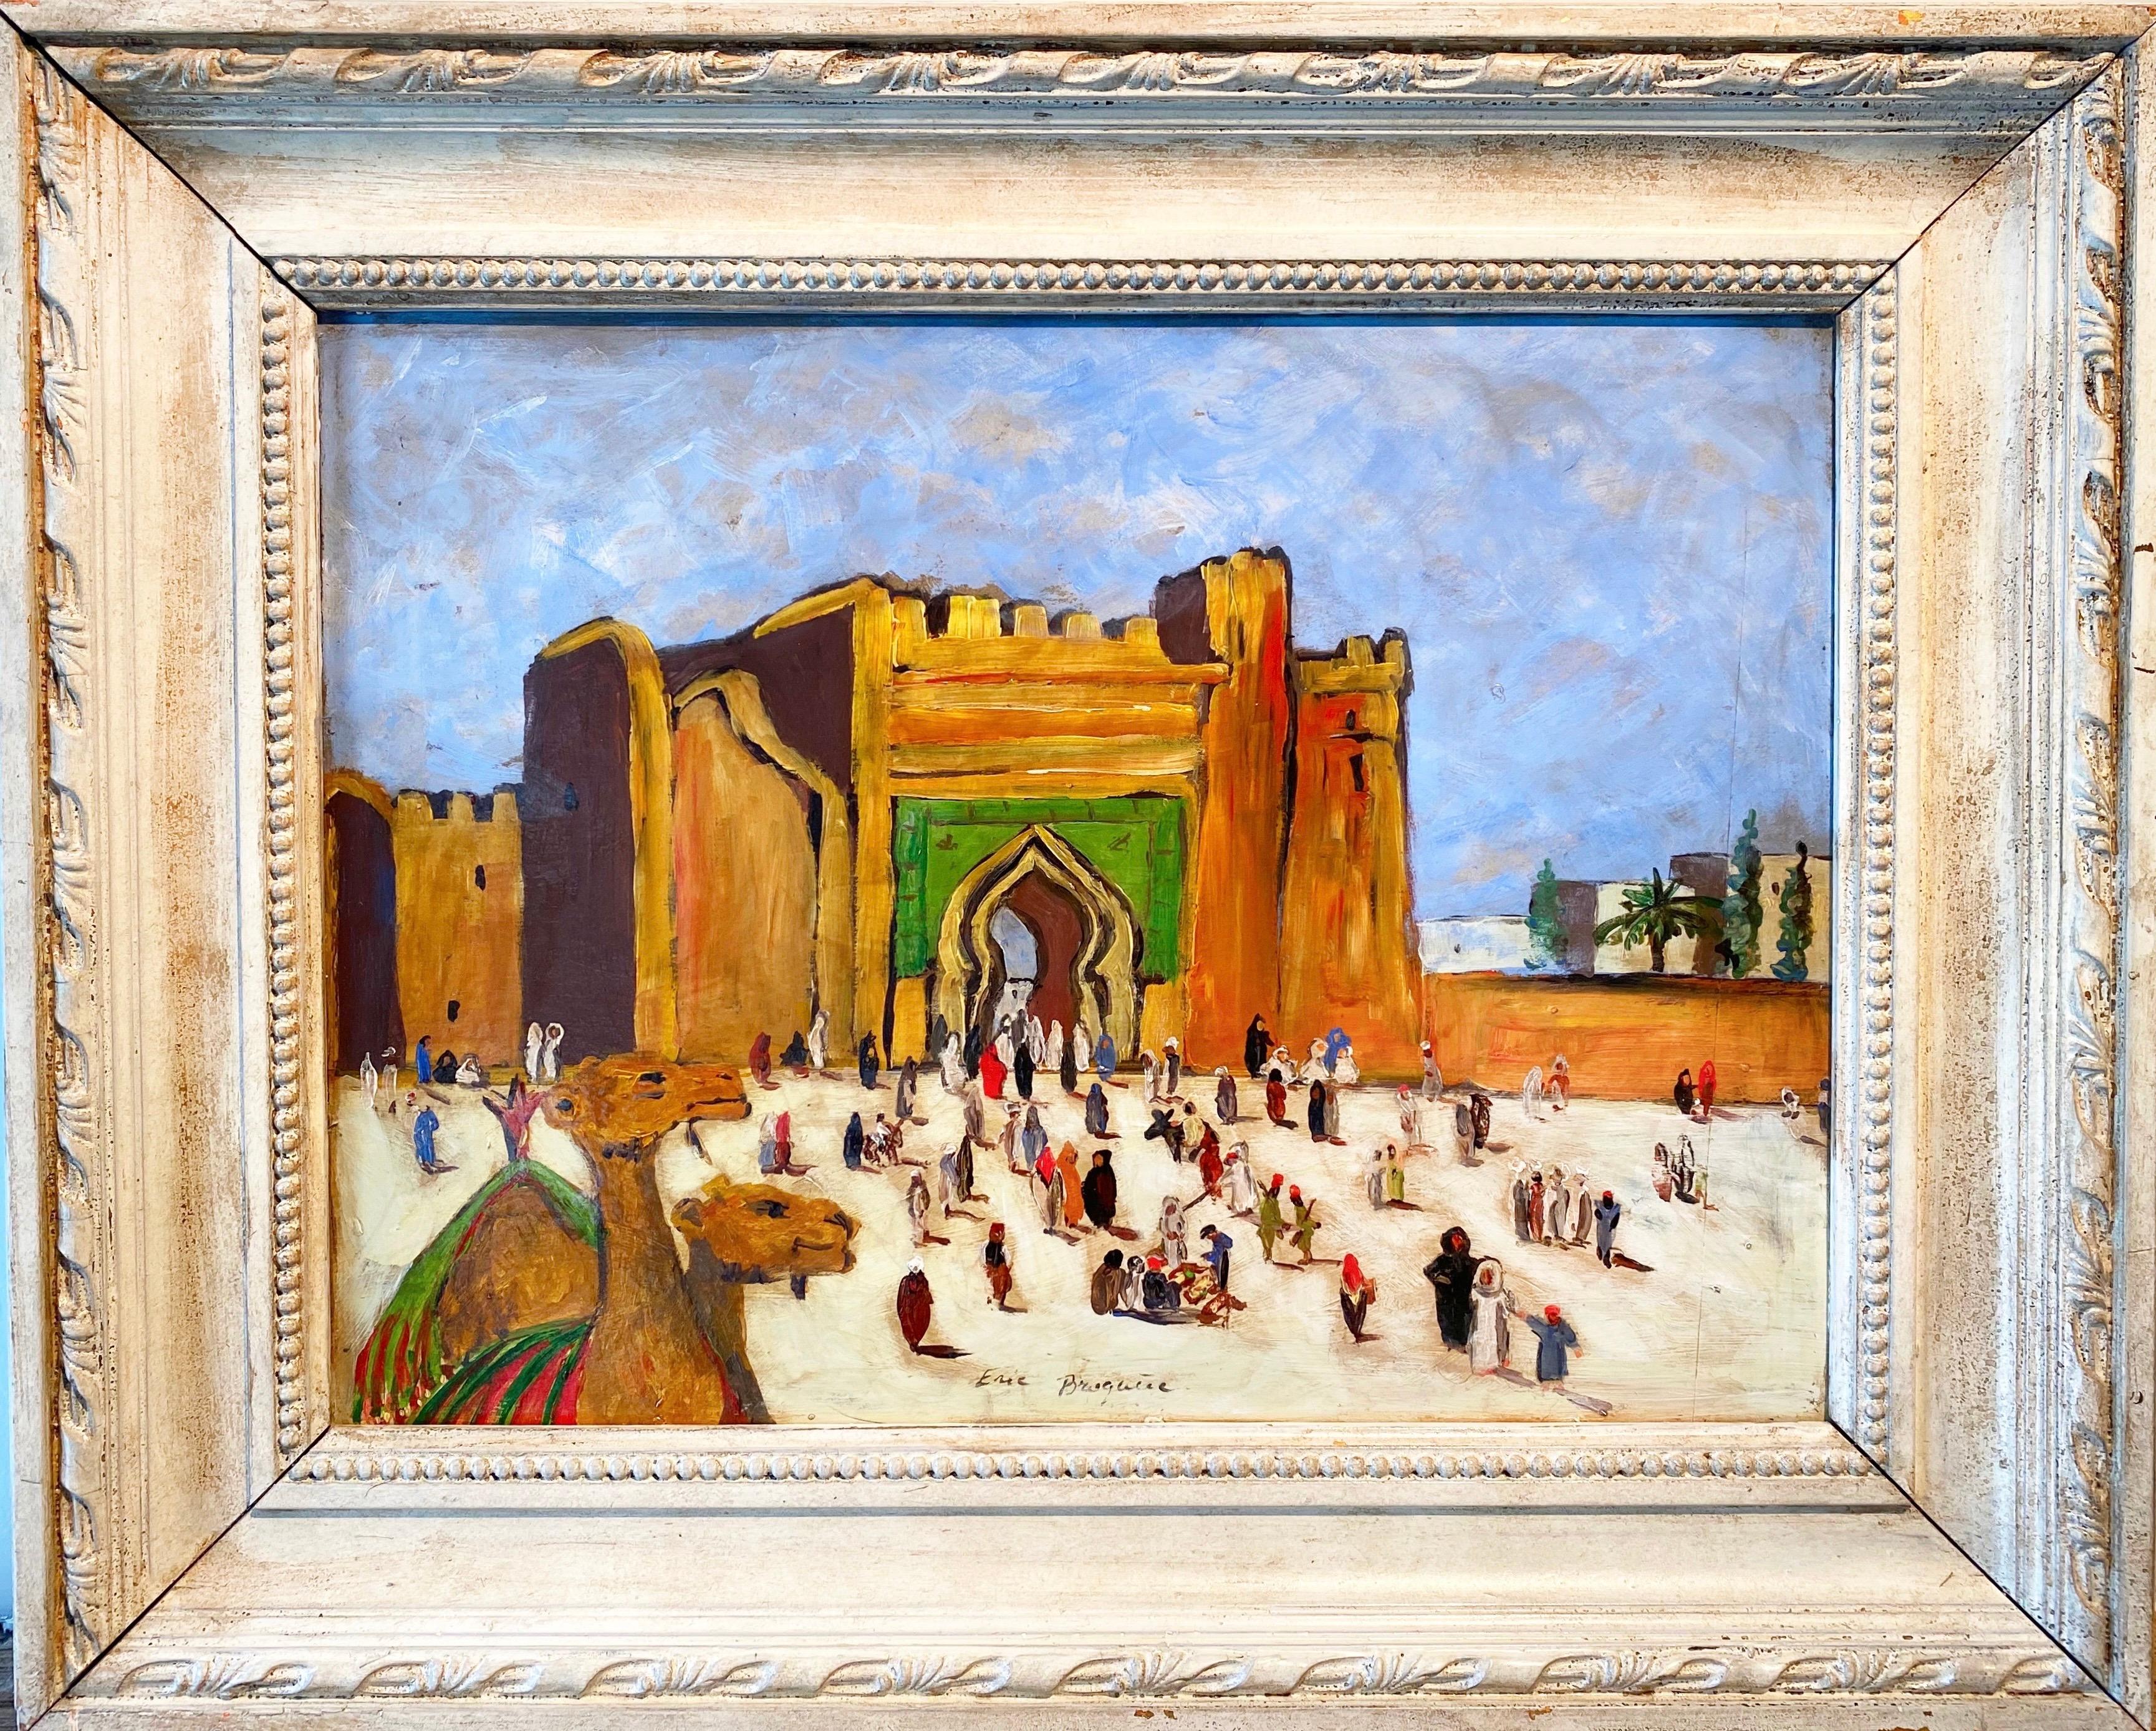 Eric Bruguère Landscape Painting - Antique oriental Cityscape painting with a camel - Morocco - Figurative Exotic